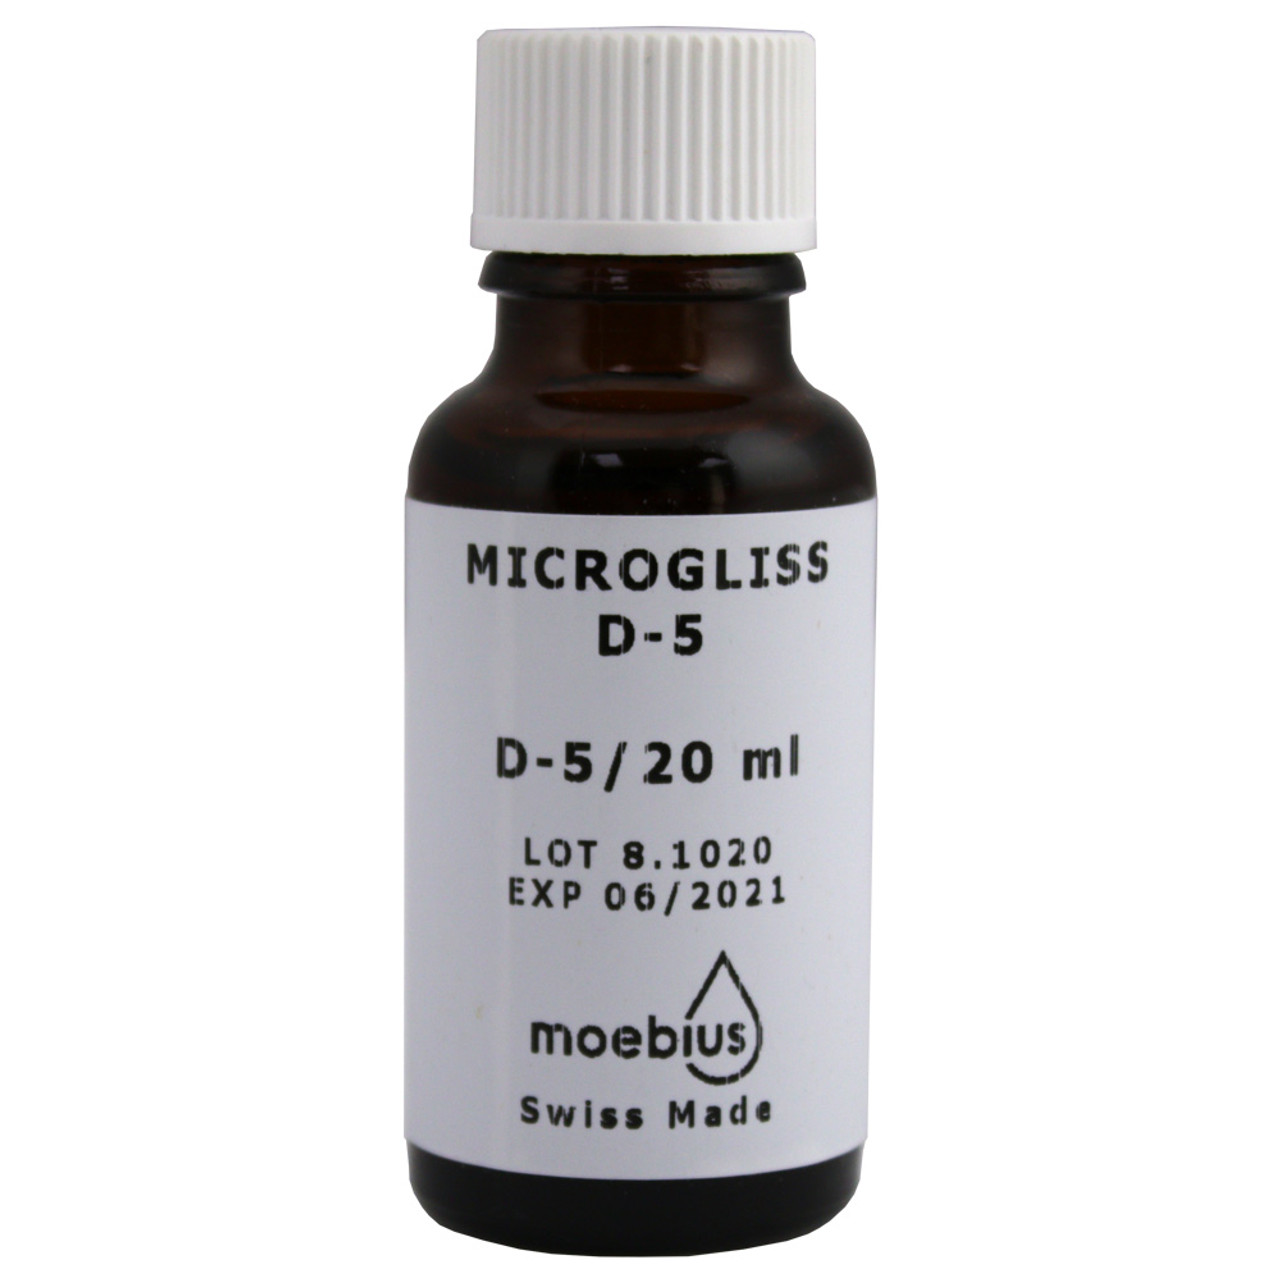 Moebius D-5 Microgliss Watch and Clock Oil Grease | Esslinger